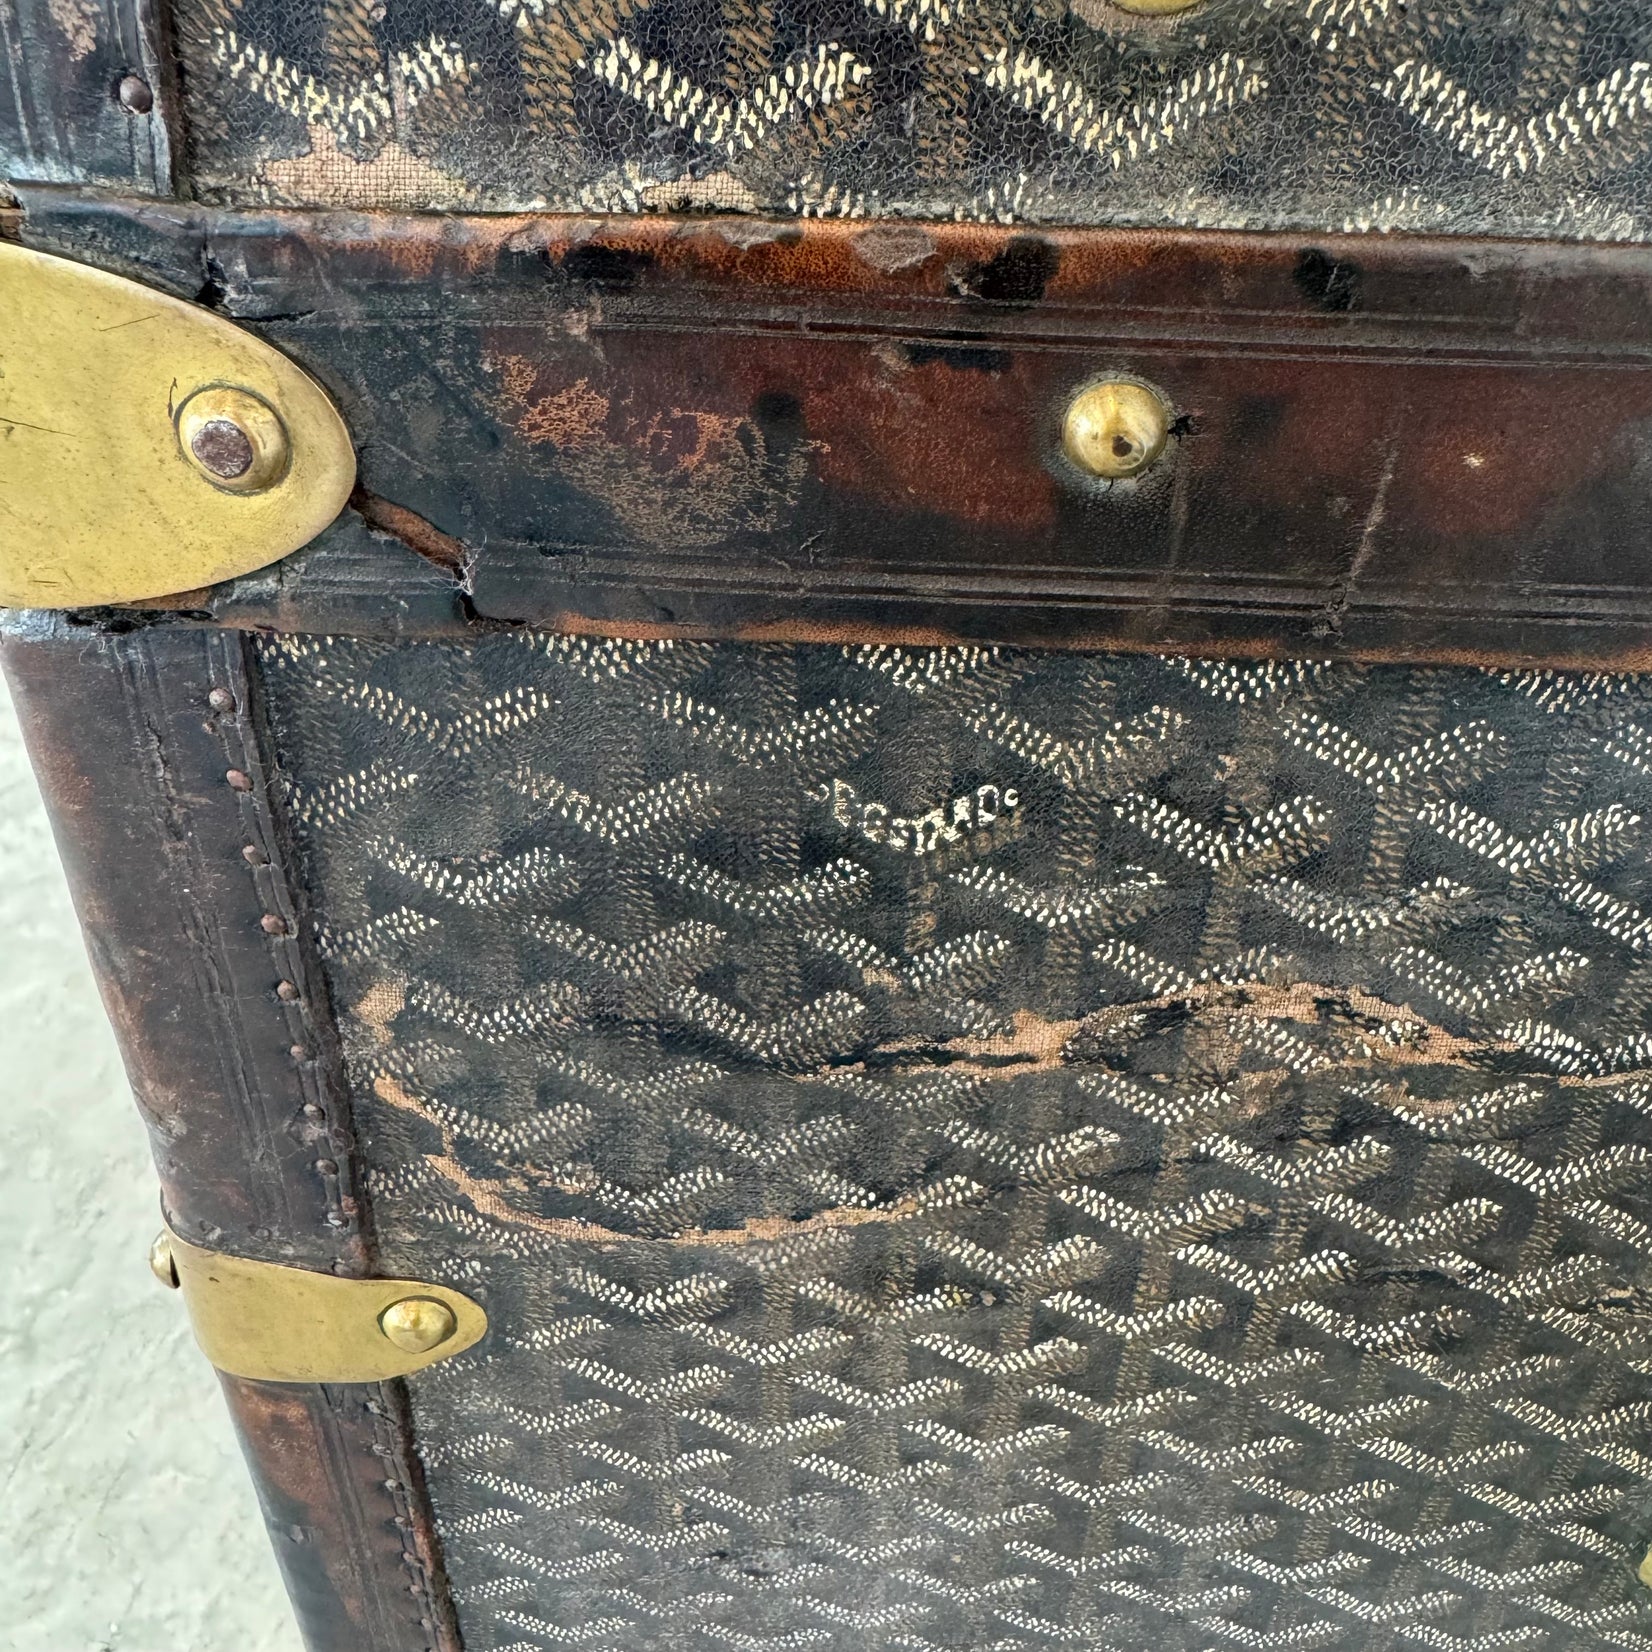 Leather, Canvas and Brass Steamer Trunk